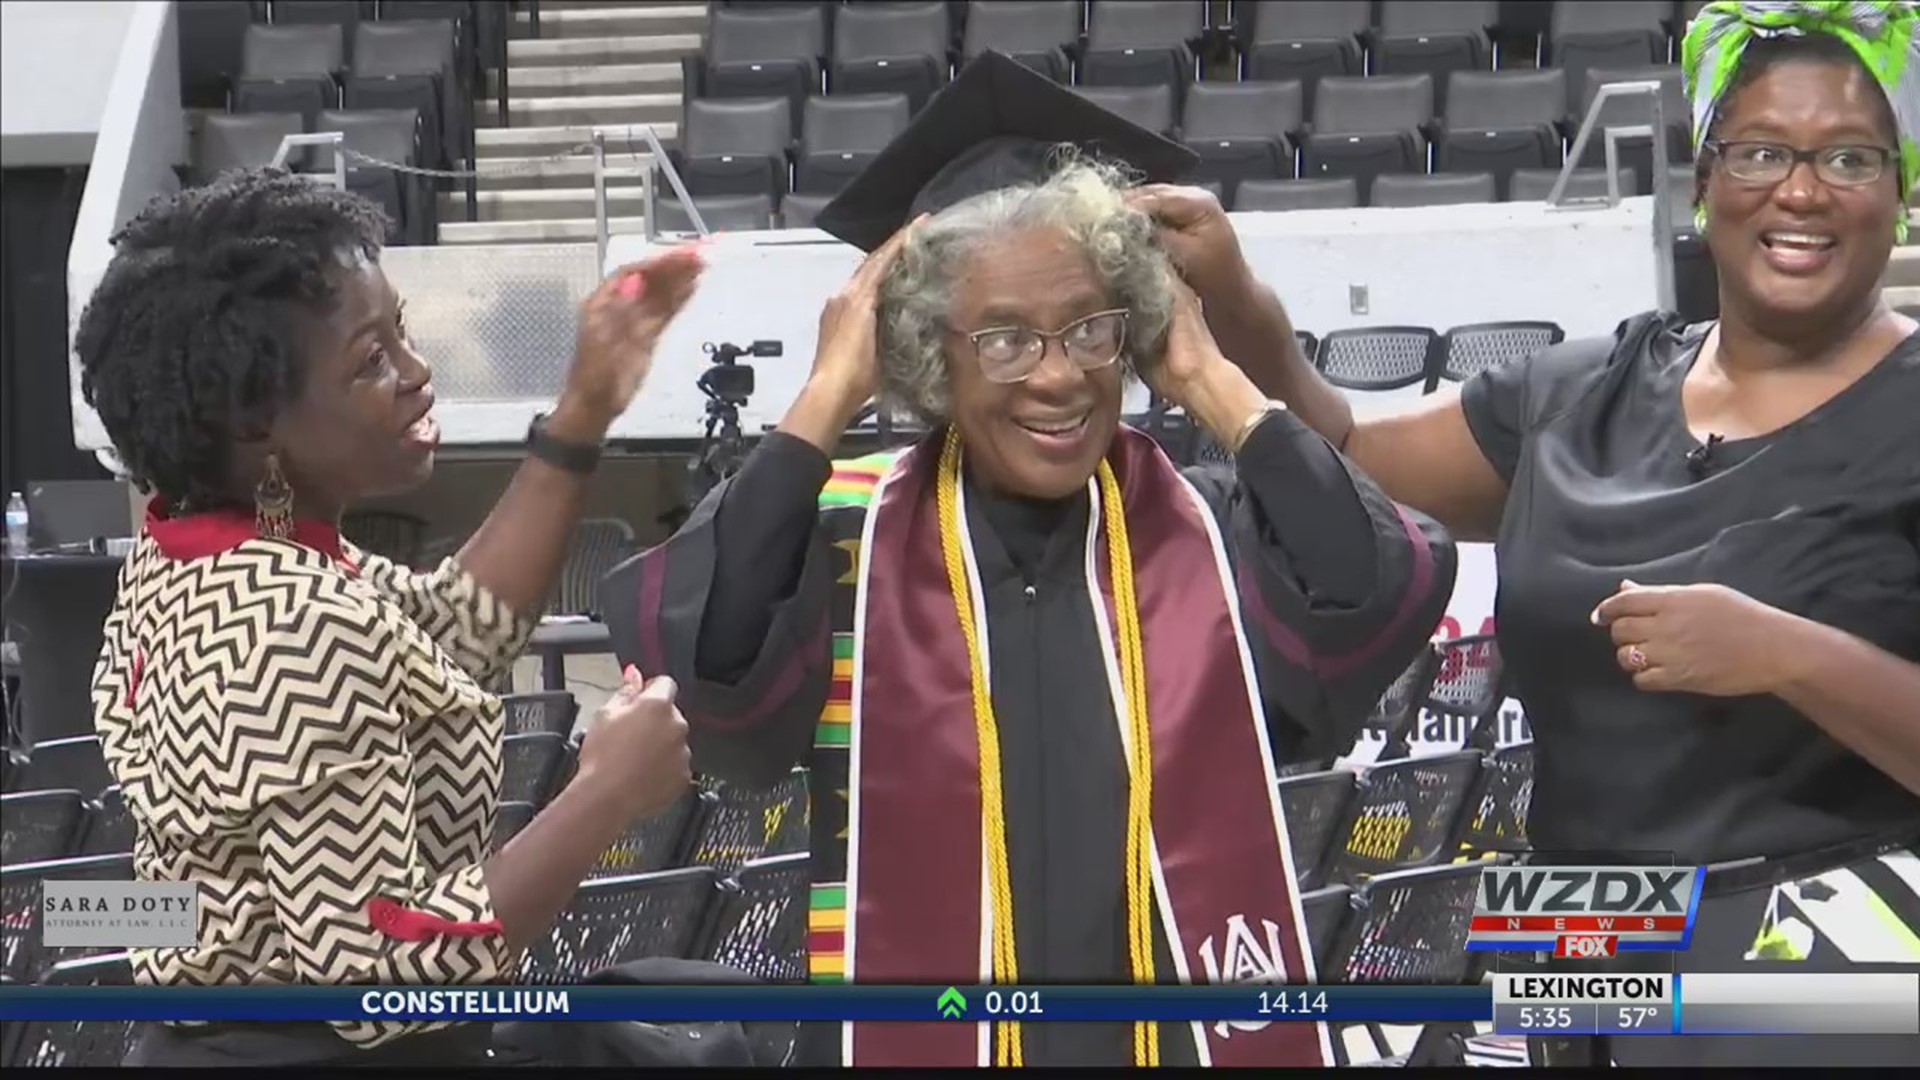 An 80-year old woman graduated from Alabama A&M University Friday, spreading her story of inspiration.